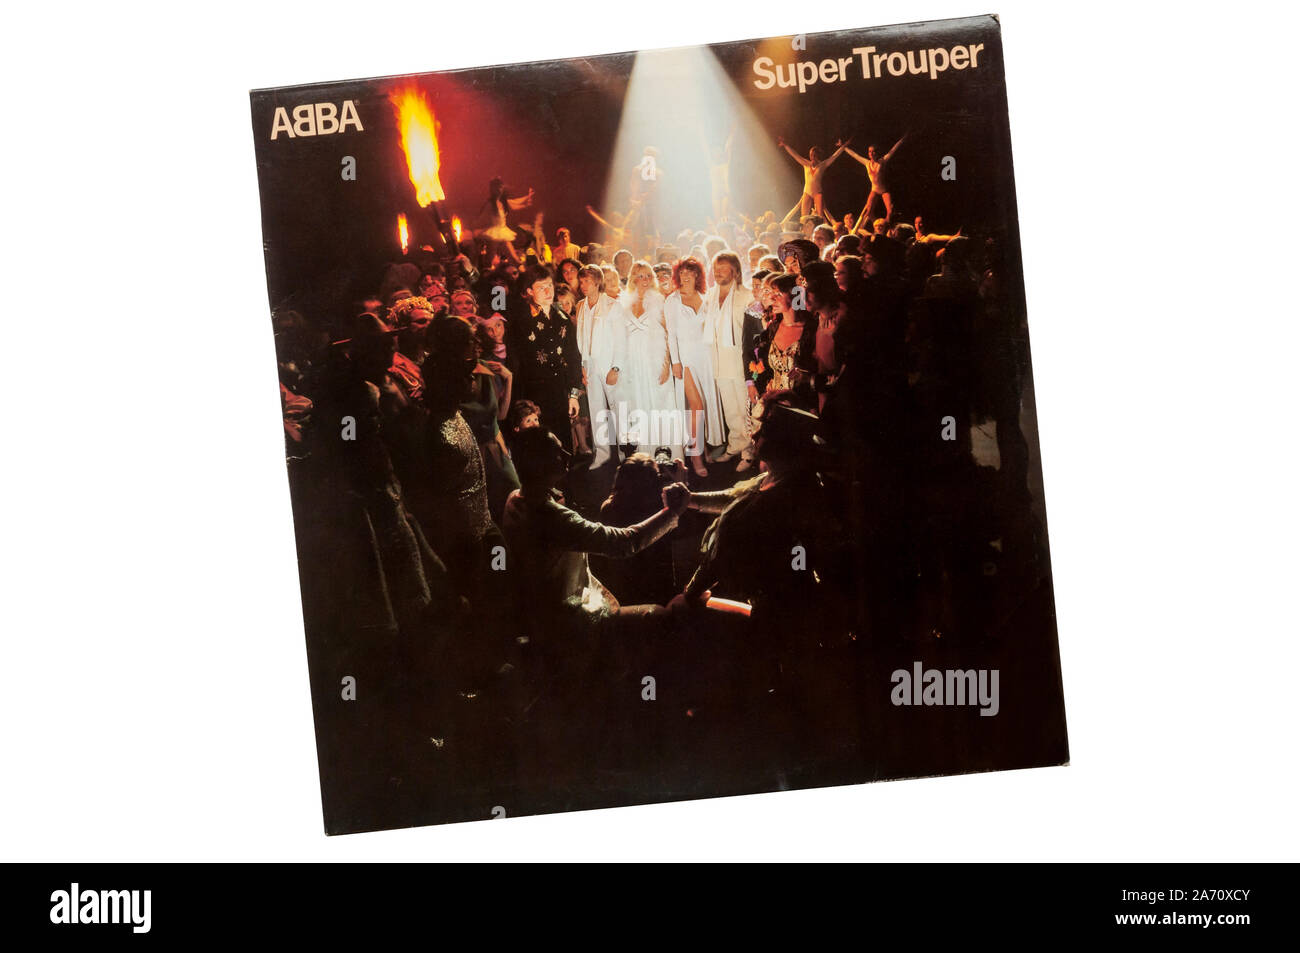 Super Trouper was the 7th studio album by Swedish pop group Abba, released in 1980. The album title refers to a brand of followspot stage lighting. Stock Photo